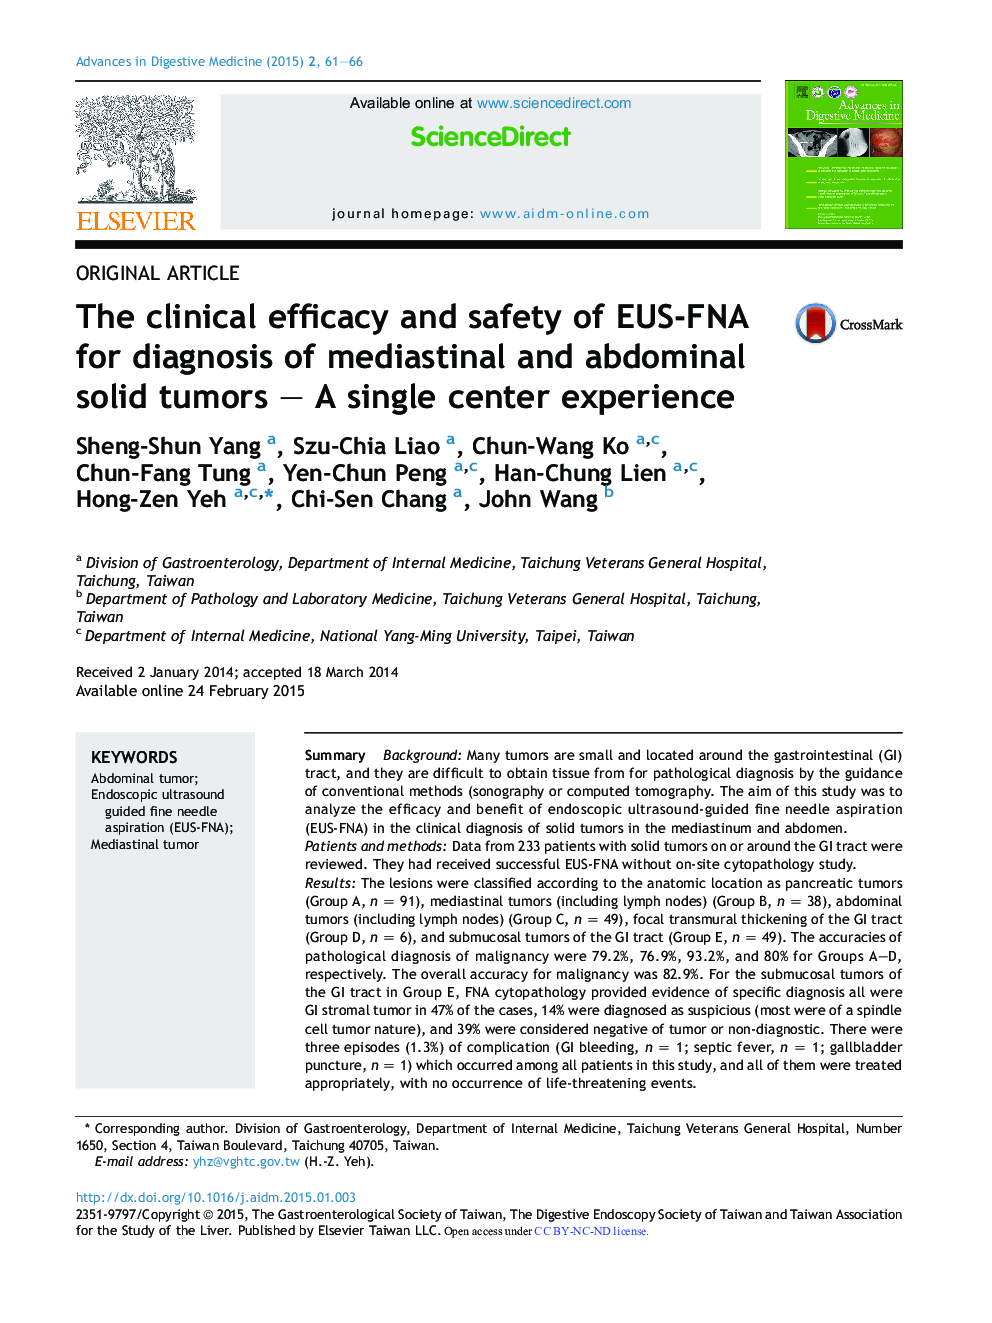 The clinical efficacy and safety of EUS-FNA for diagnosis of mediastinal and abdominal solid tumors – A single center experience